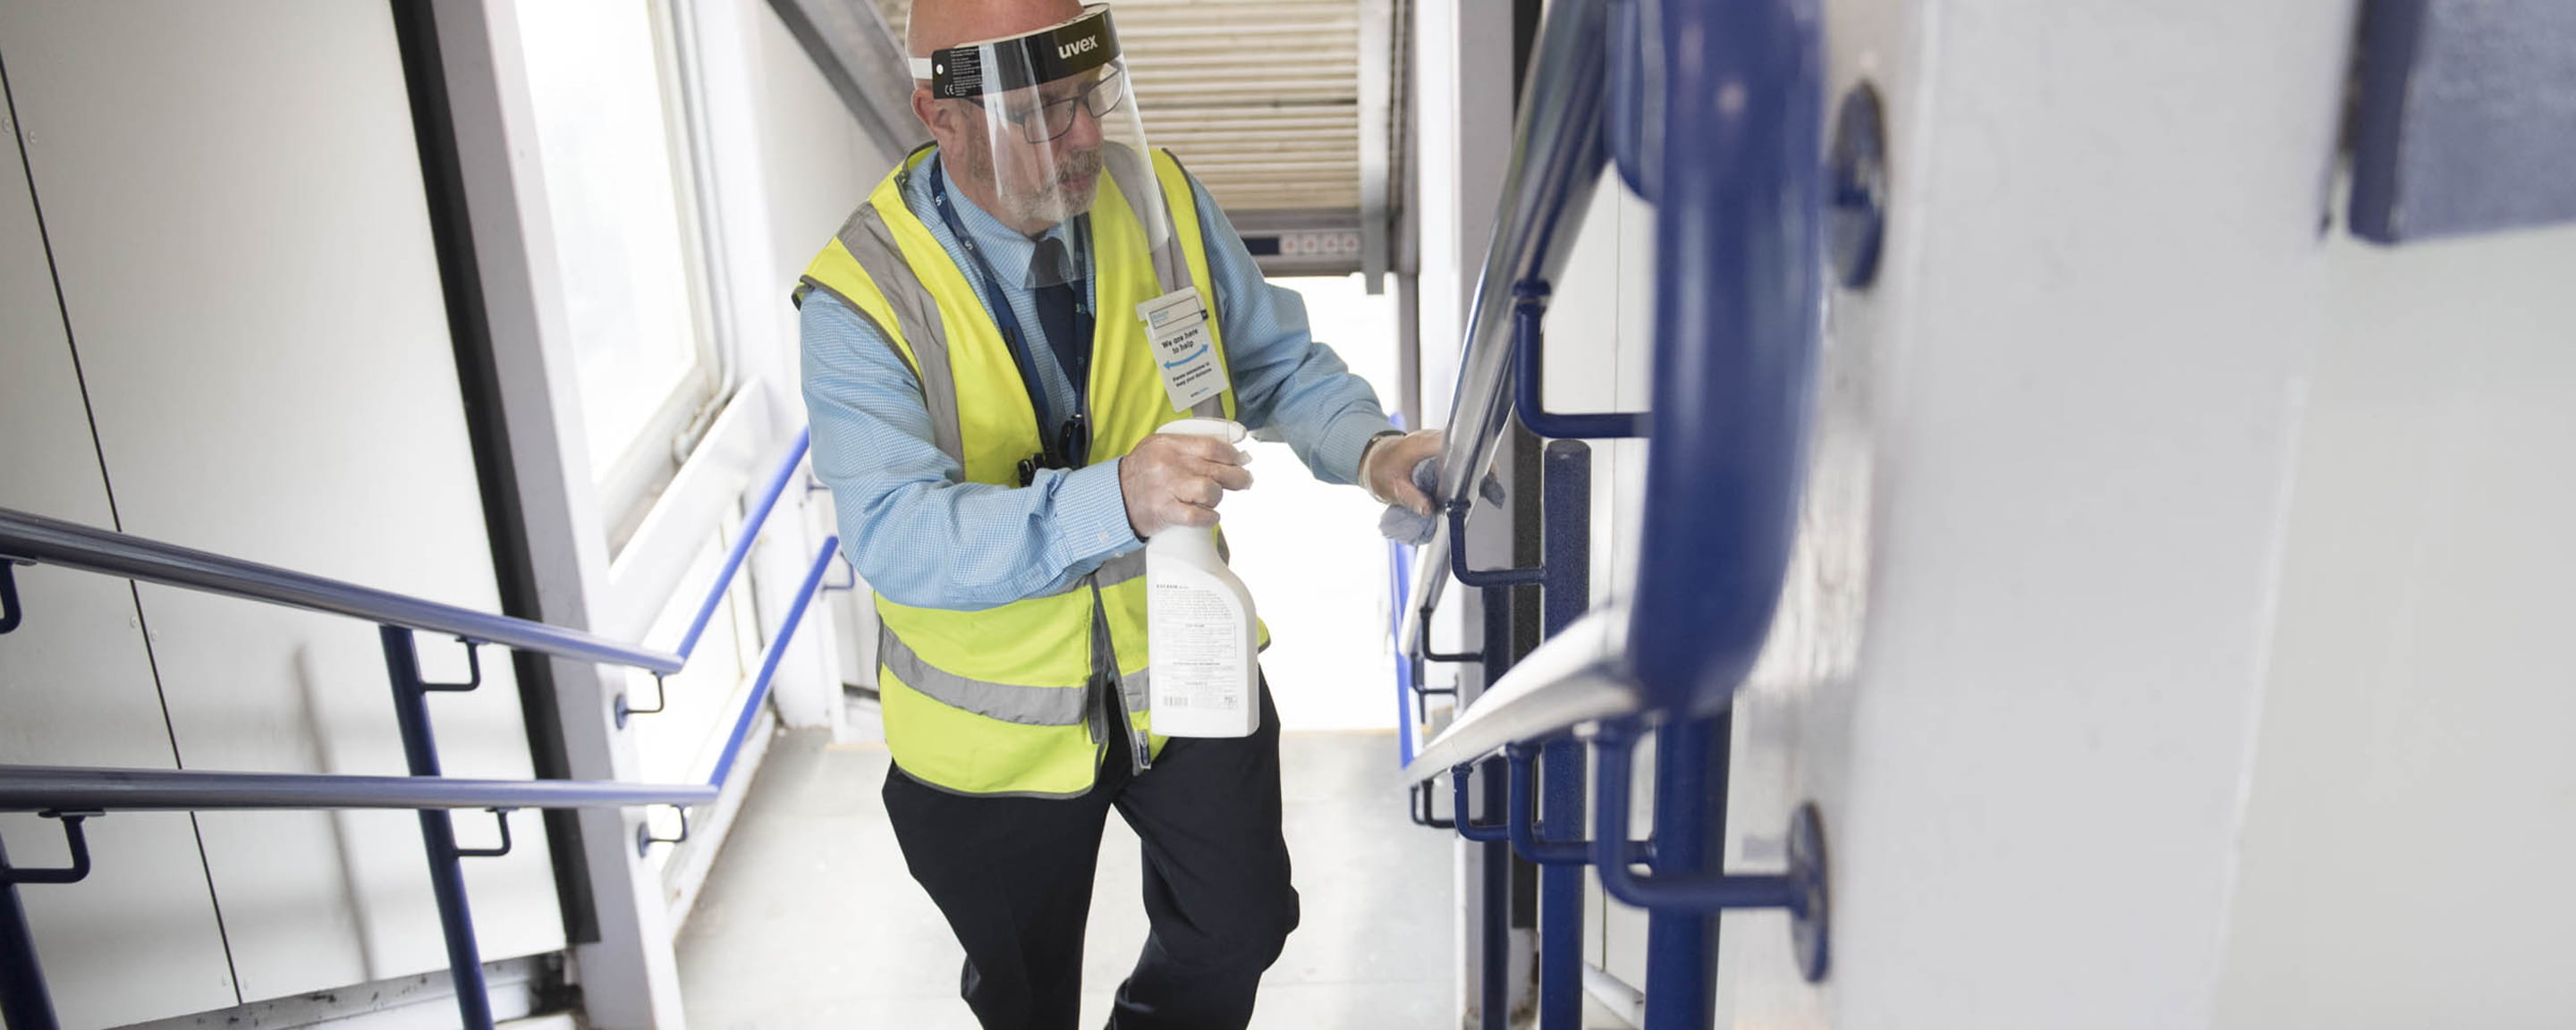 Station staff cleaning a hand rail